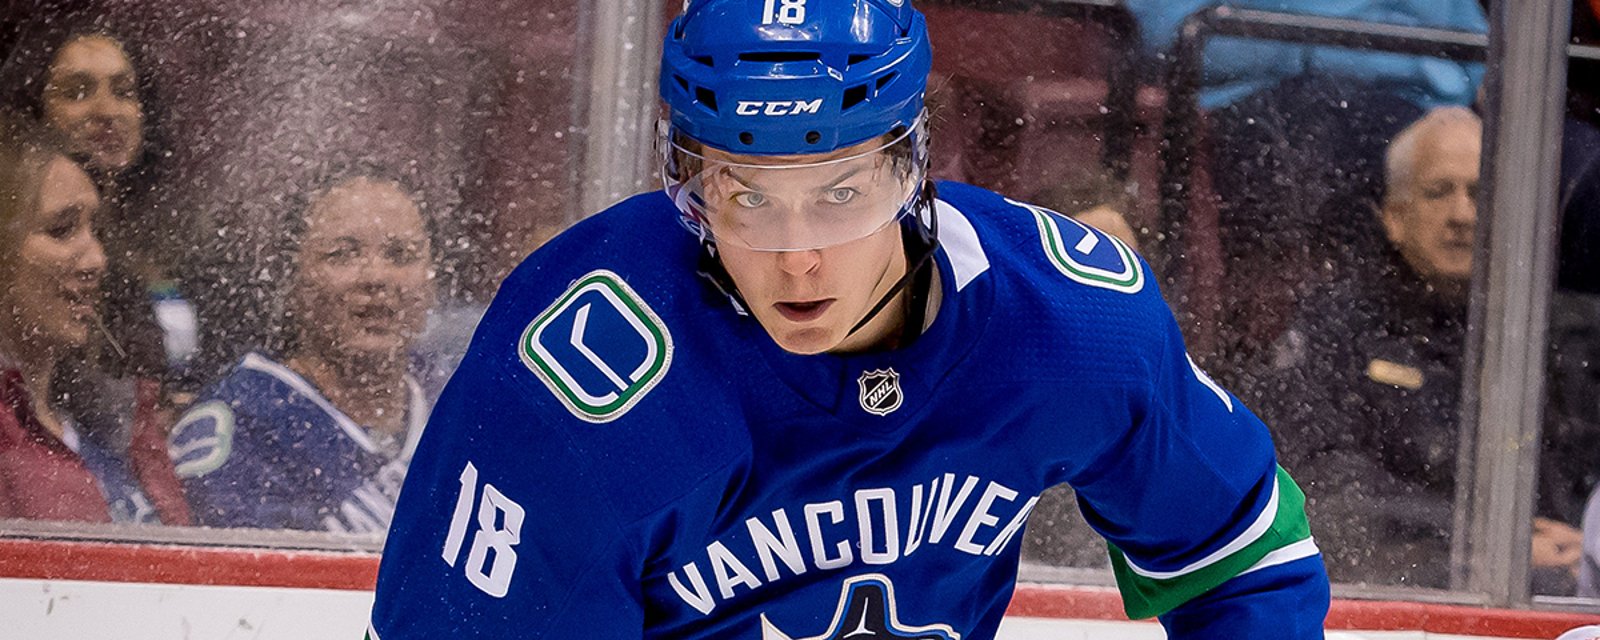 Breaking: Canucks lose Tanev and Virtanen, forced to make another AHL call up